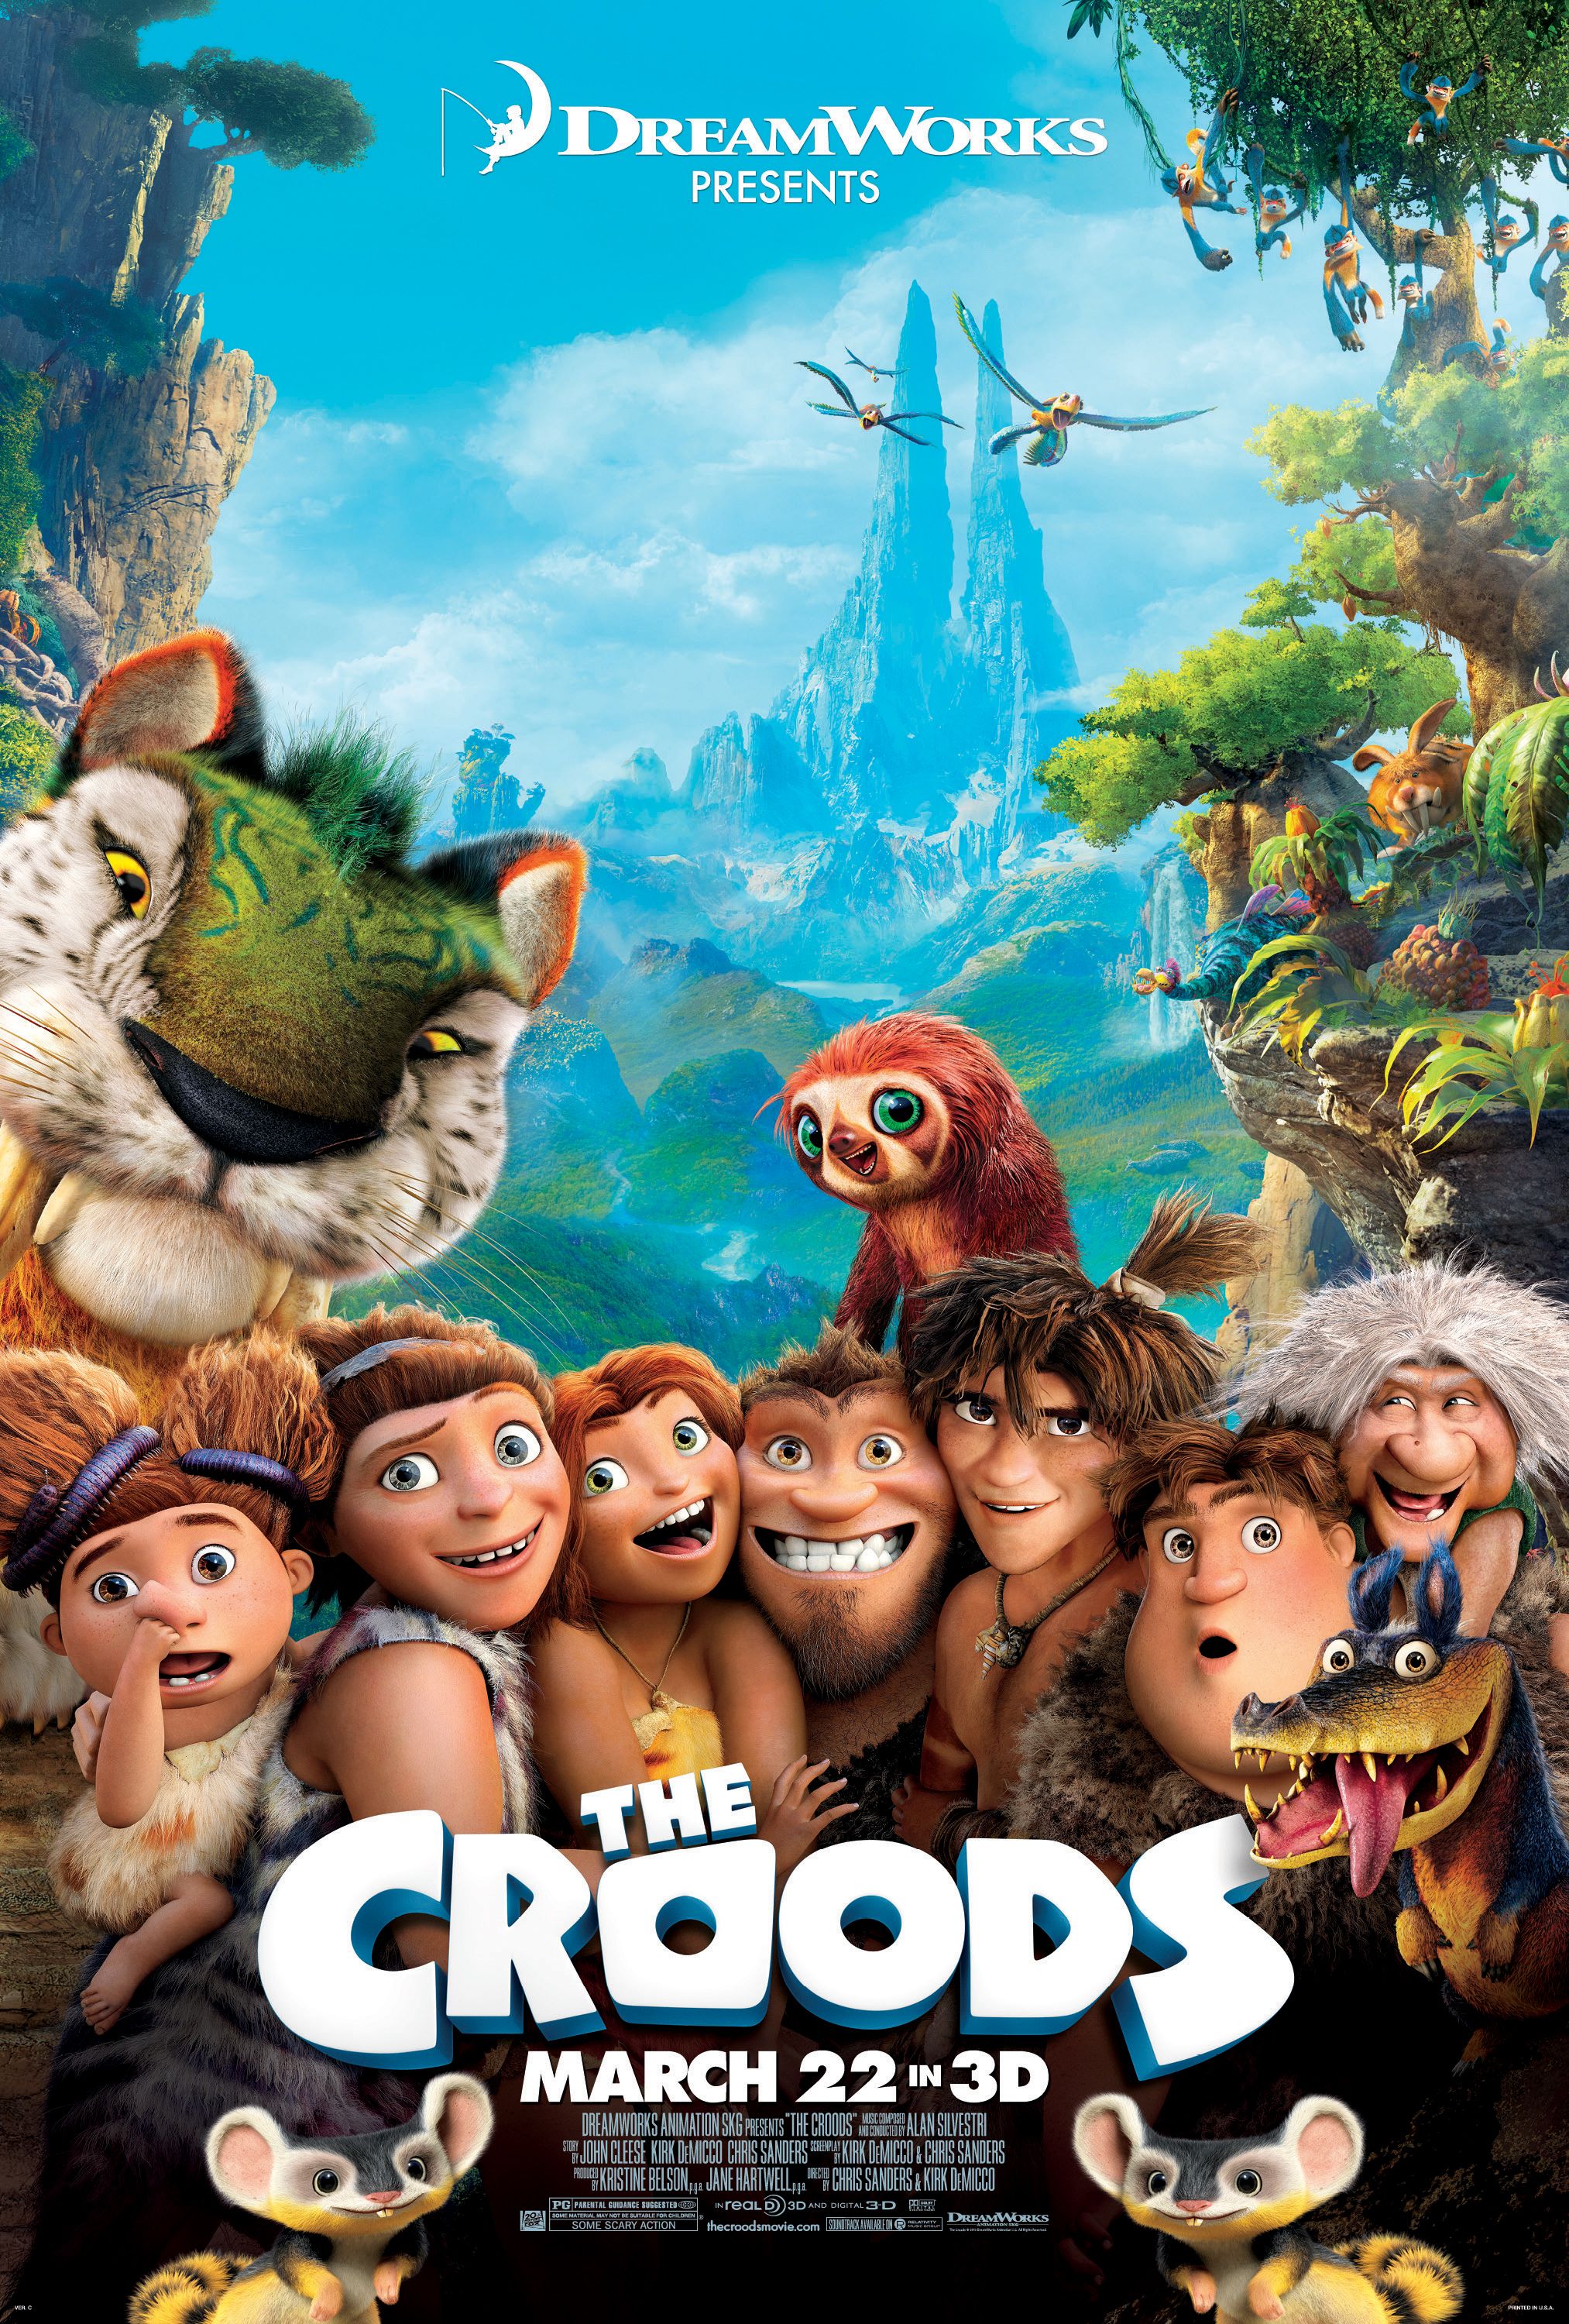 The Croods Poster 2